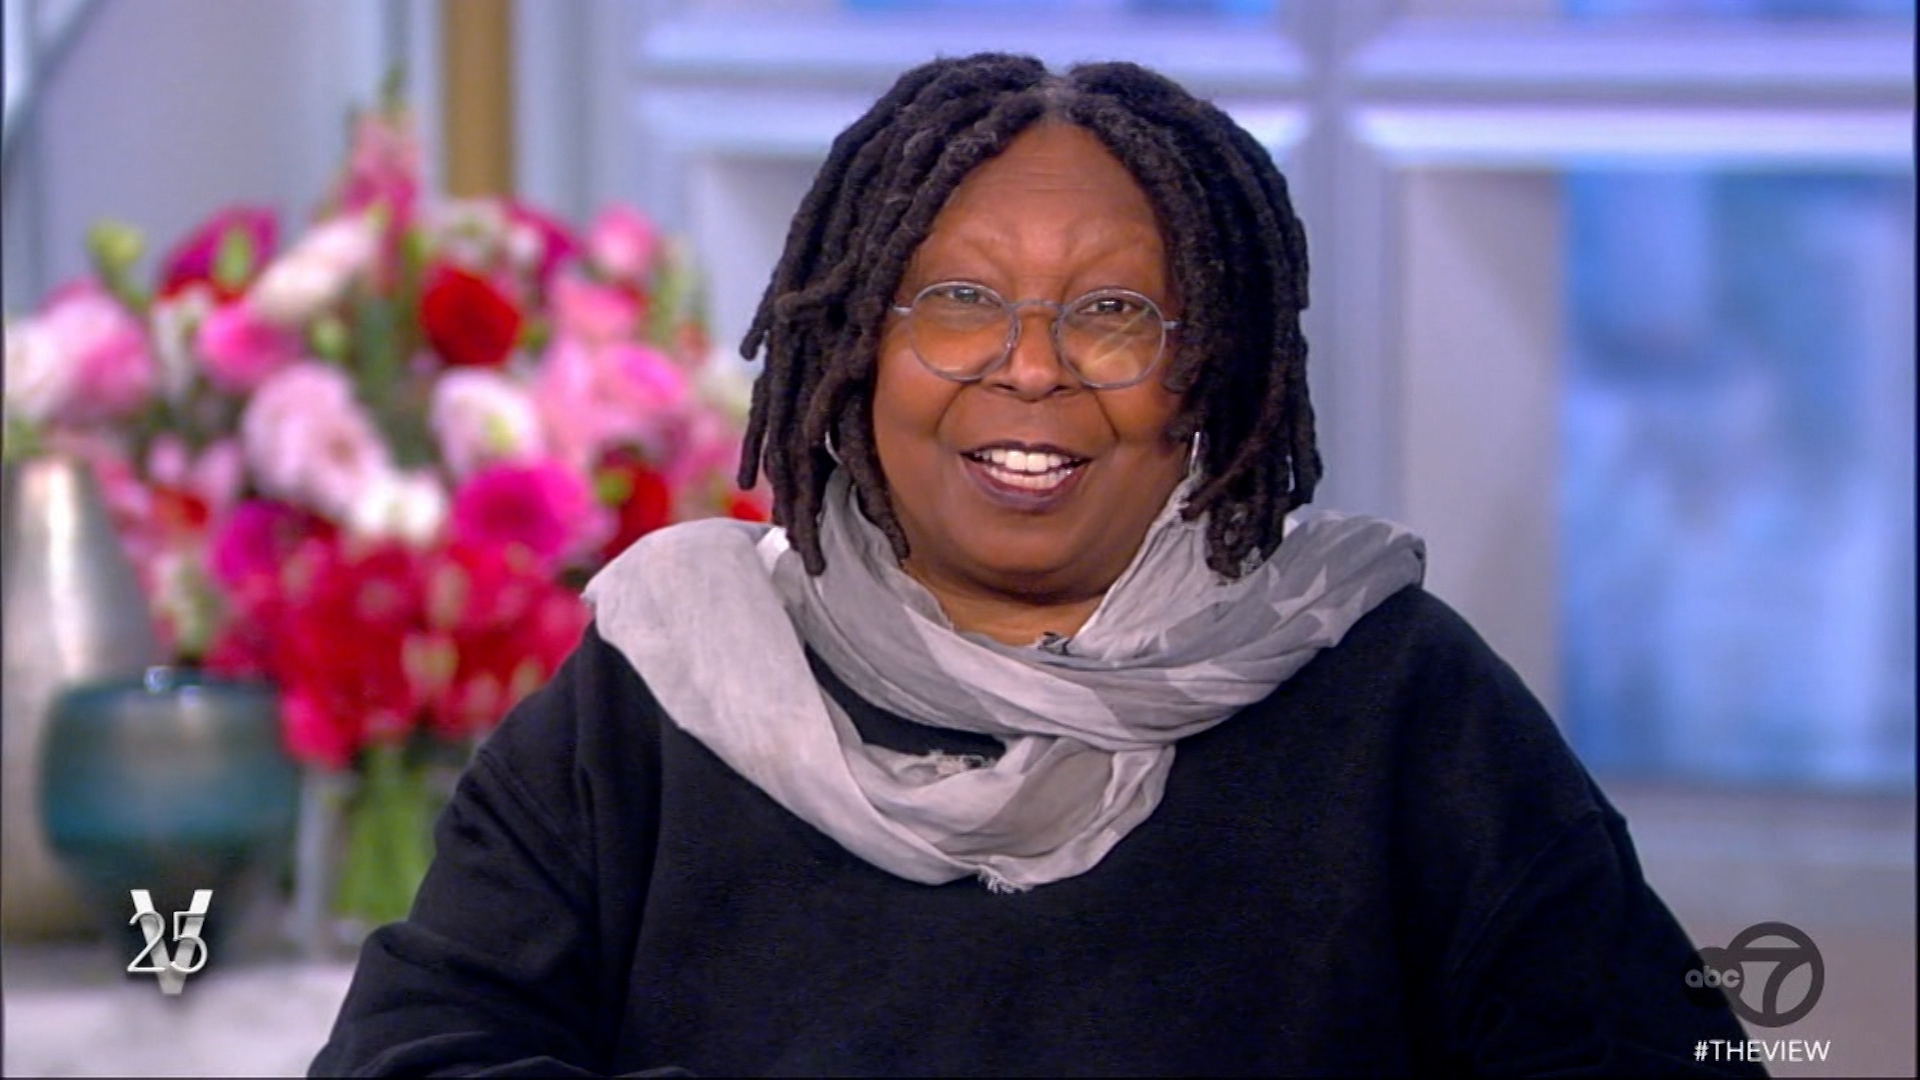 Watch Whoopi Goldberg's first comments after returning from her suspension  - CNN Video